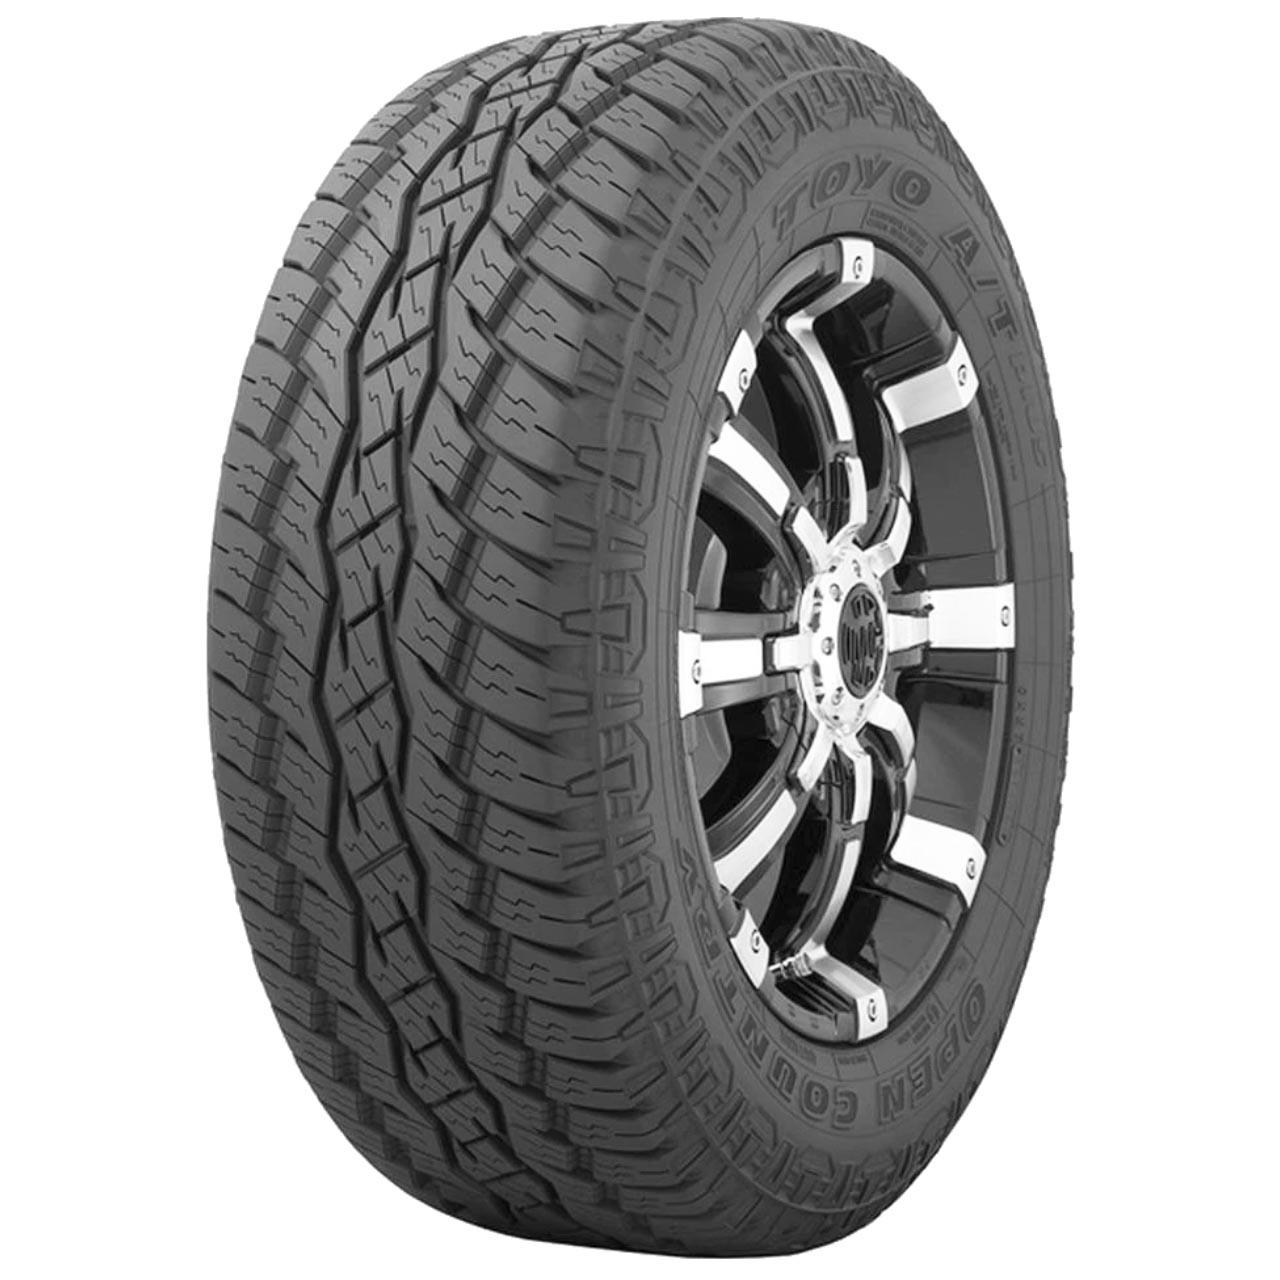 Toyo Open Country AT Plus 285/60R18 120T XL